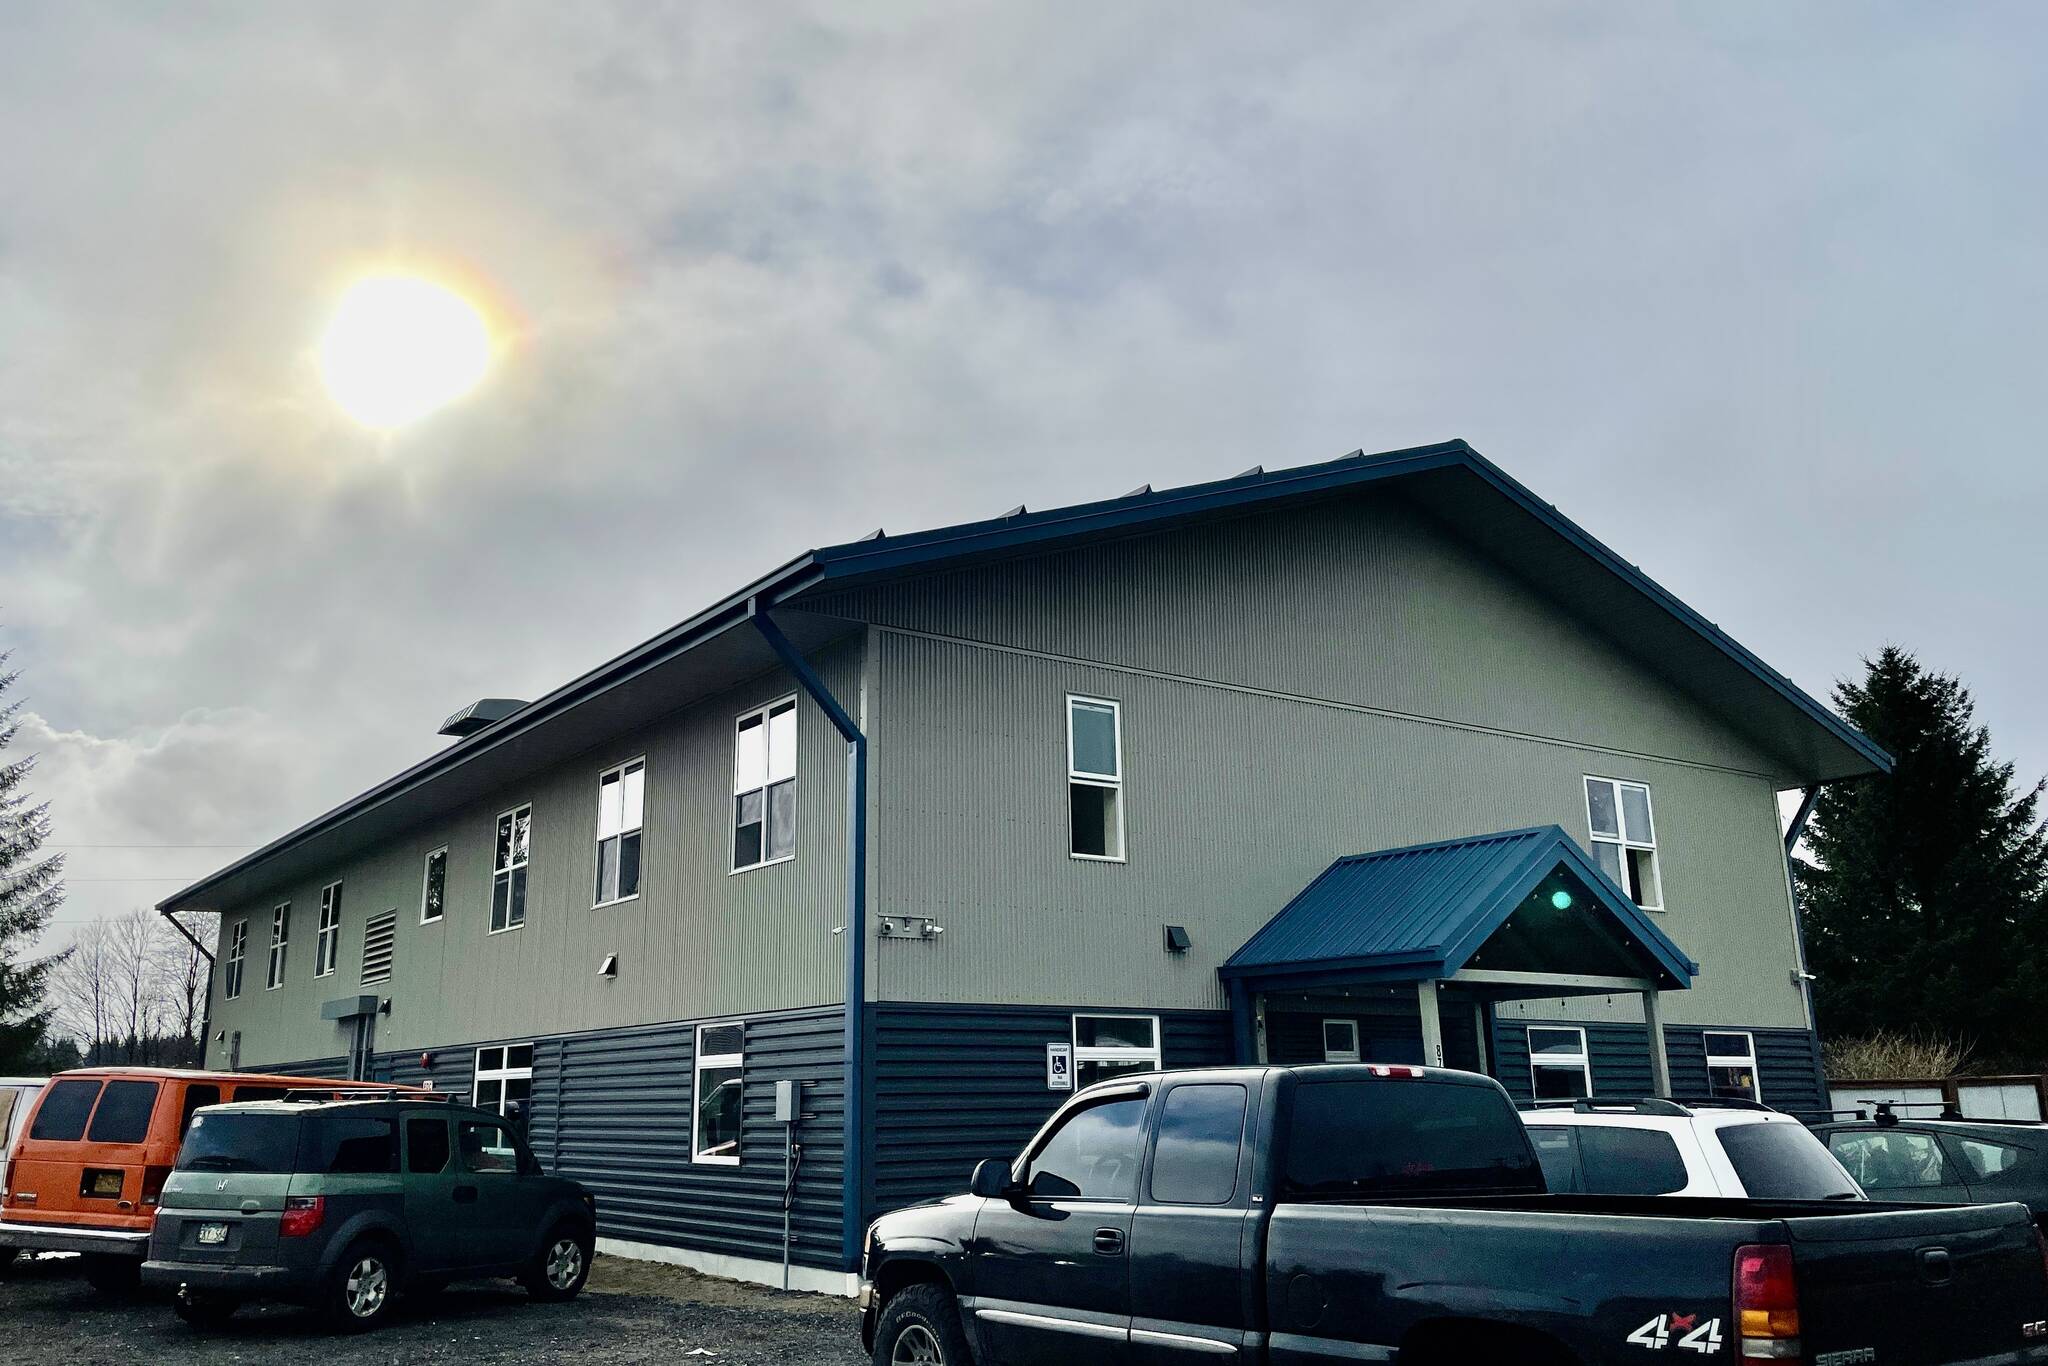 An altercation at the Glory Hall late on Friday, Feb. 25, led to one man falling out of a window, according to police. (Michael S. Lockett / Juneau Empire)